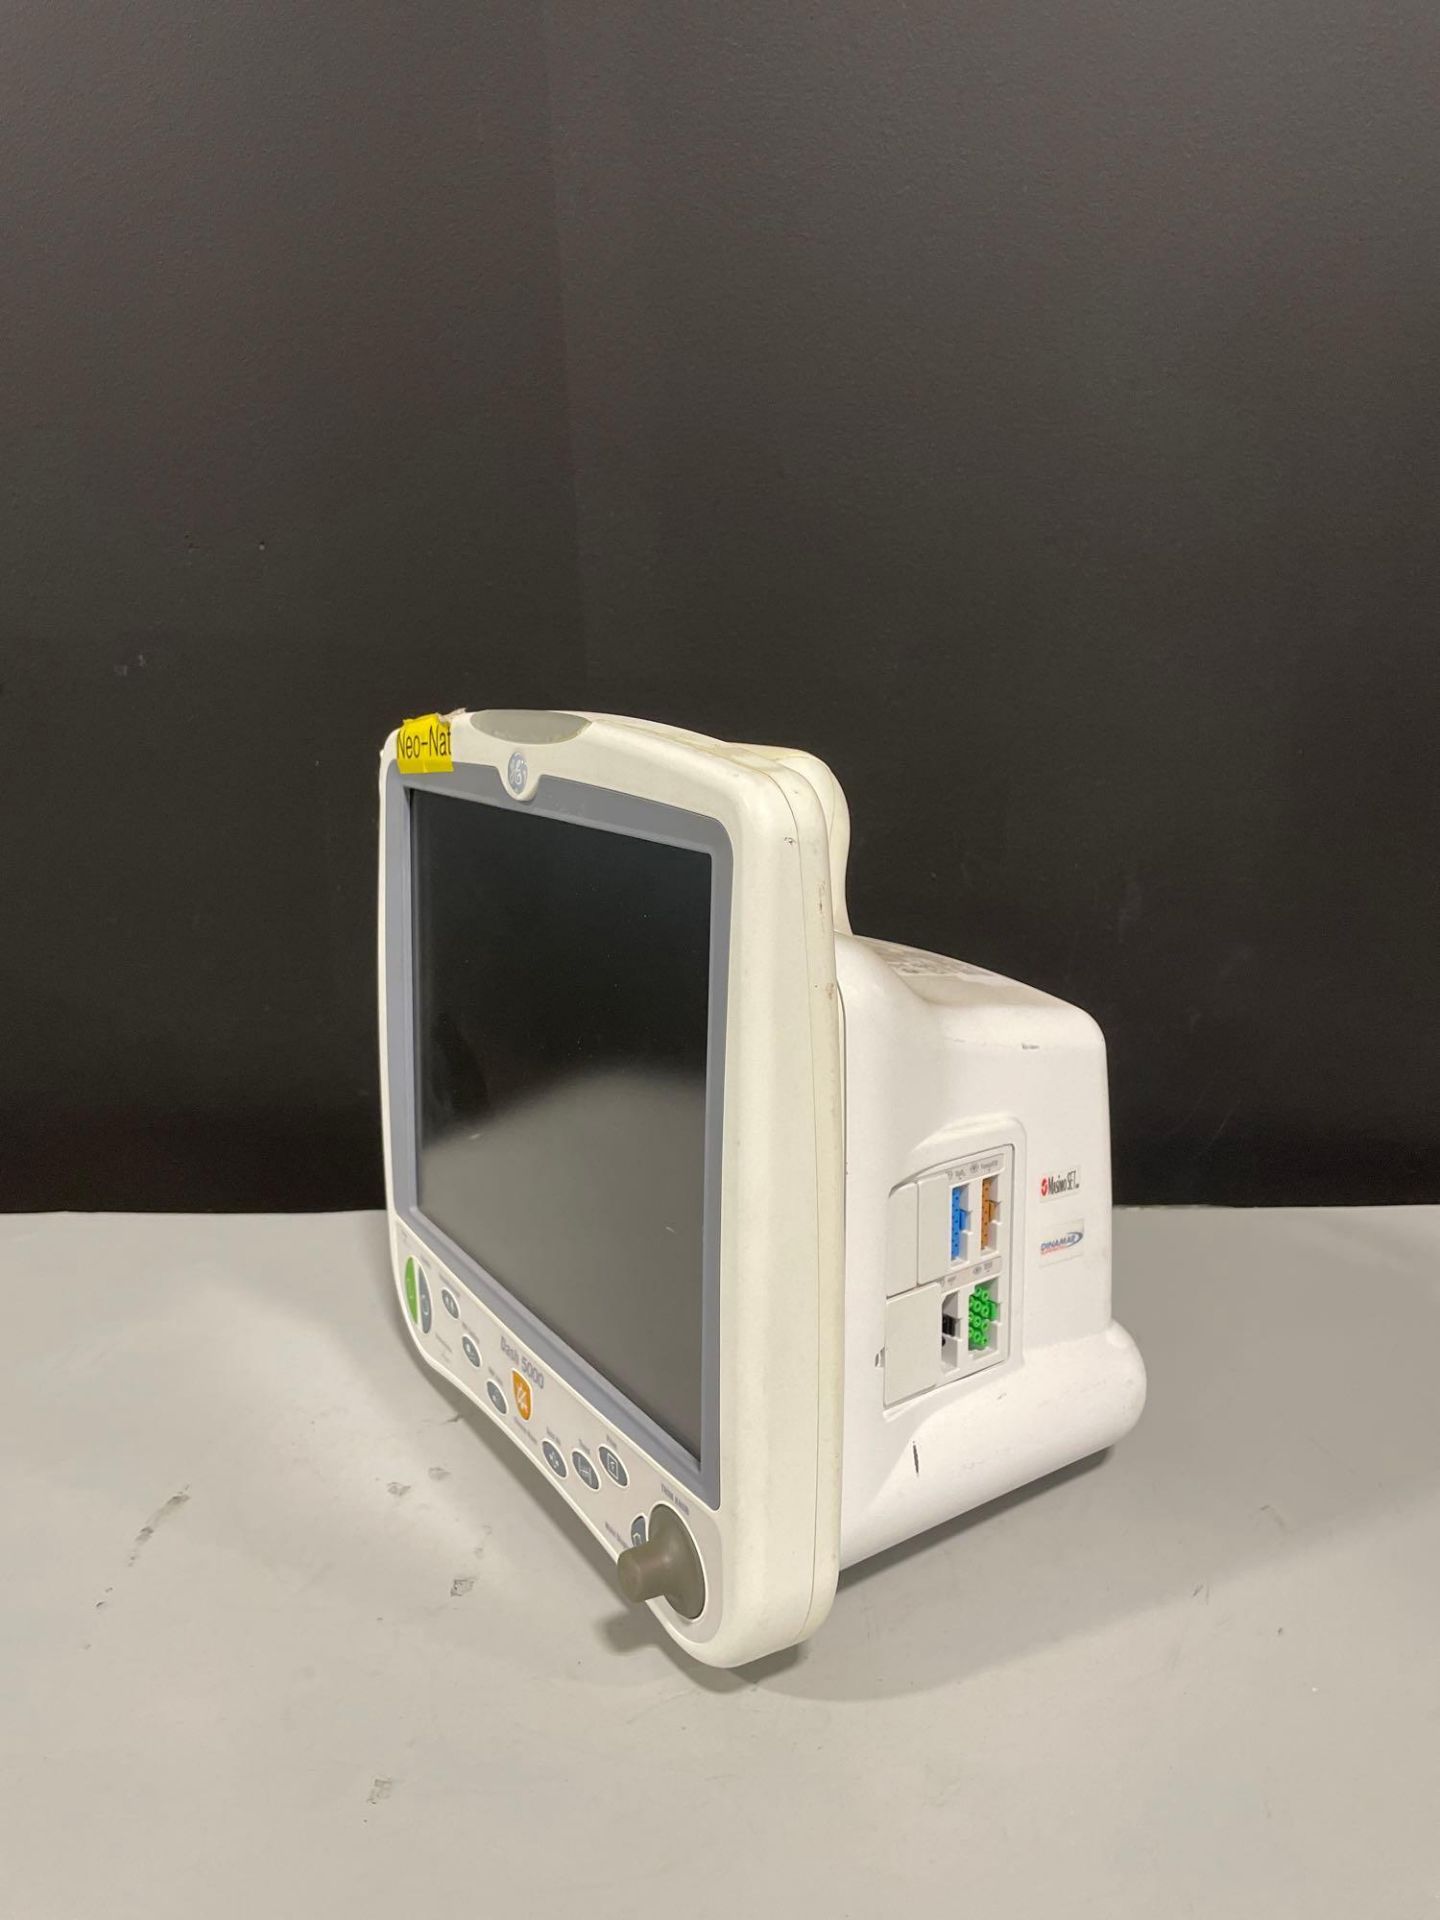 GE DASH 5000 PATIENT MONITOR - Image 2 of 3